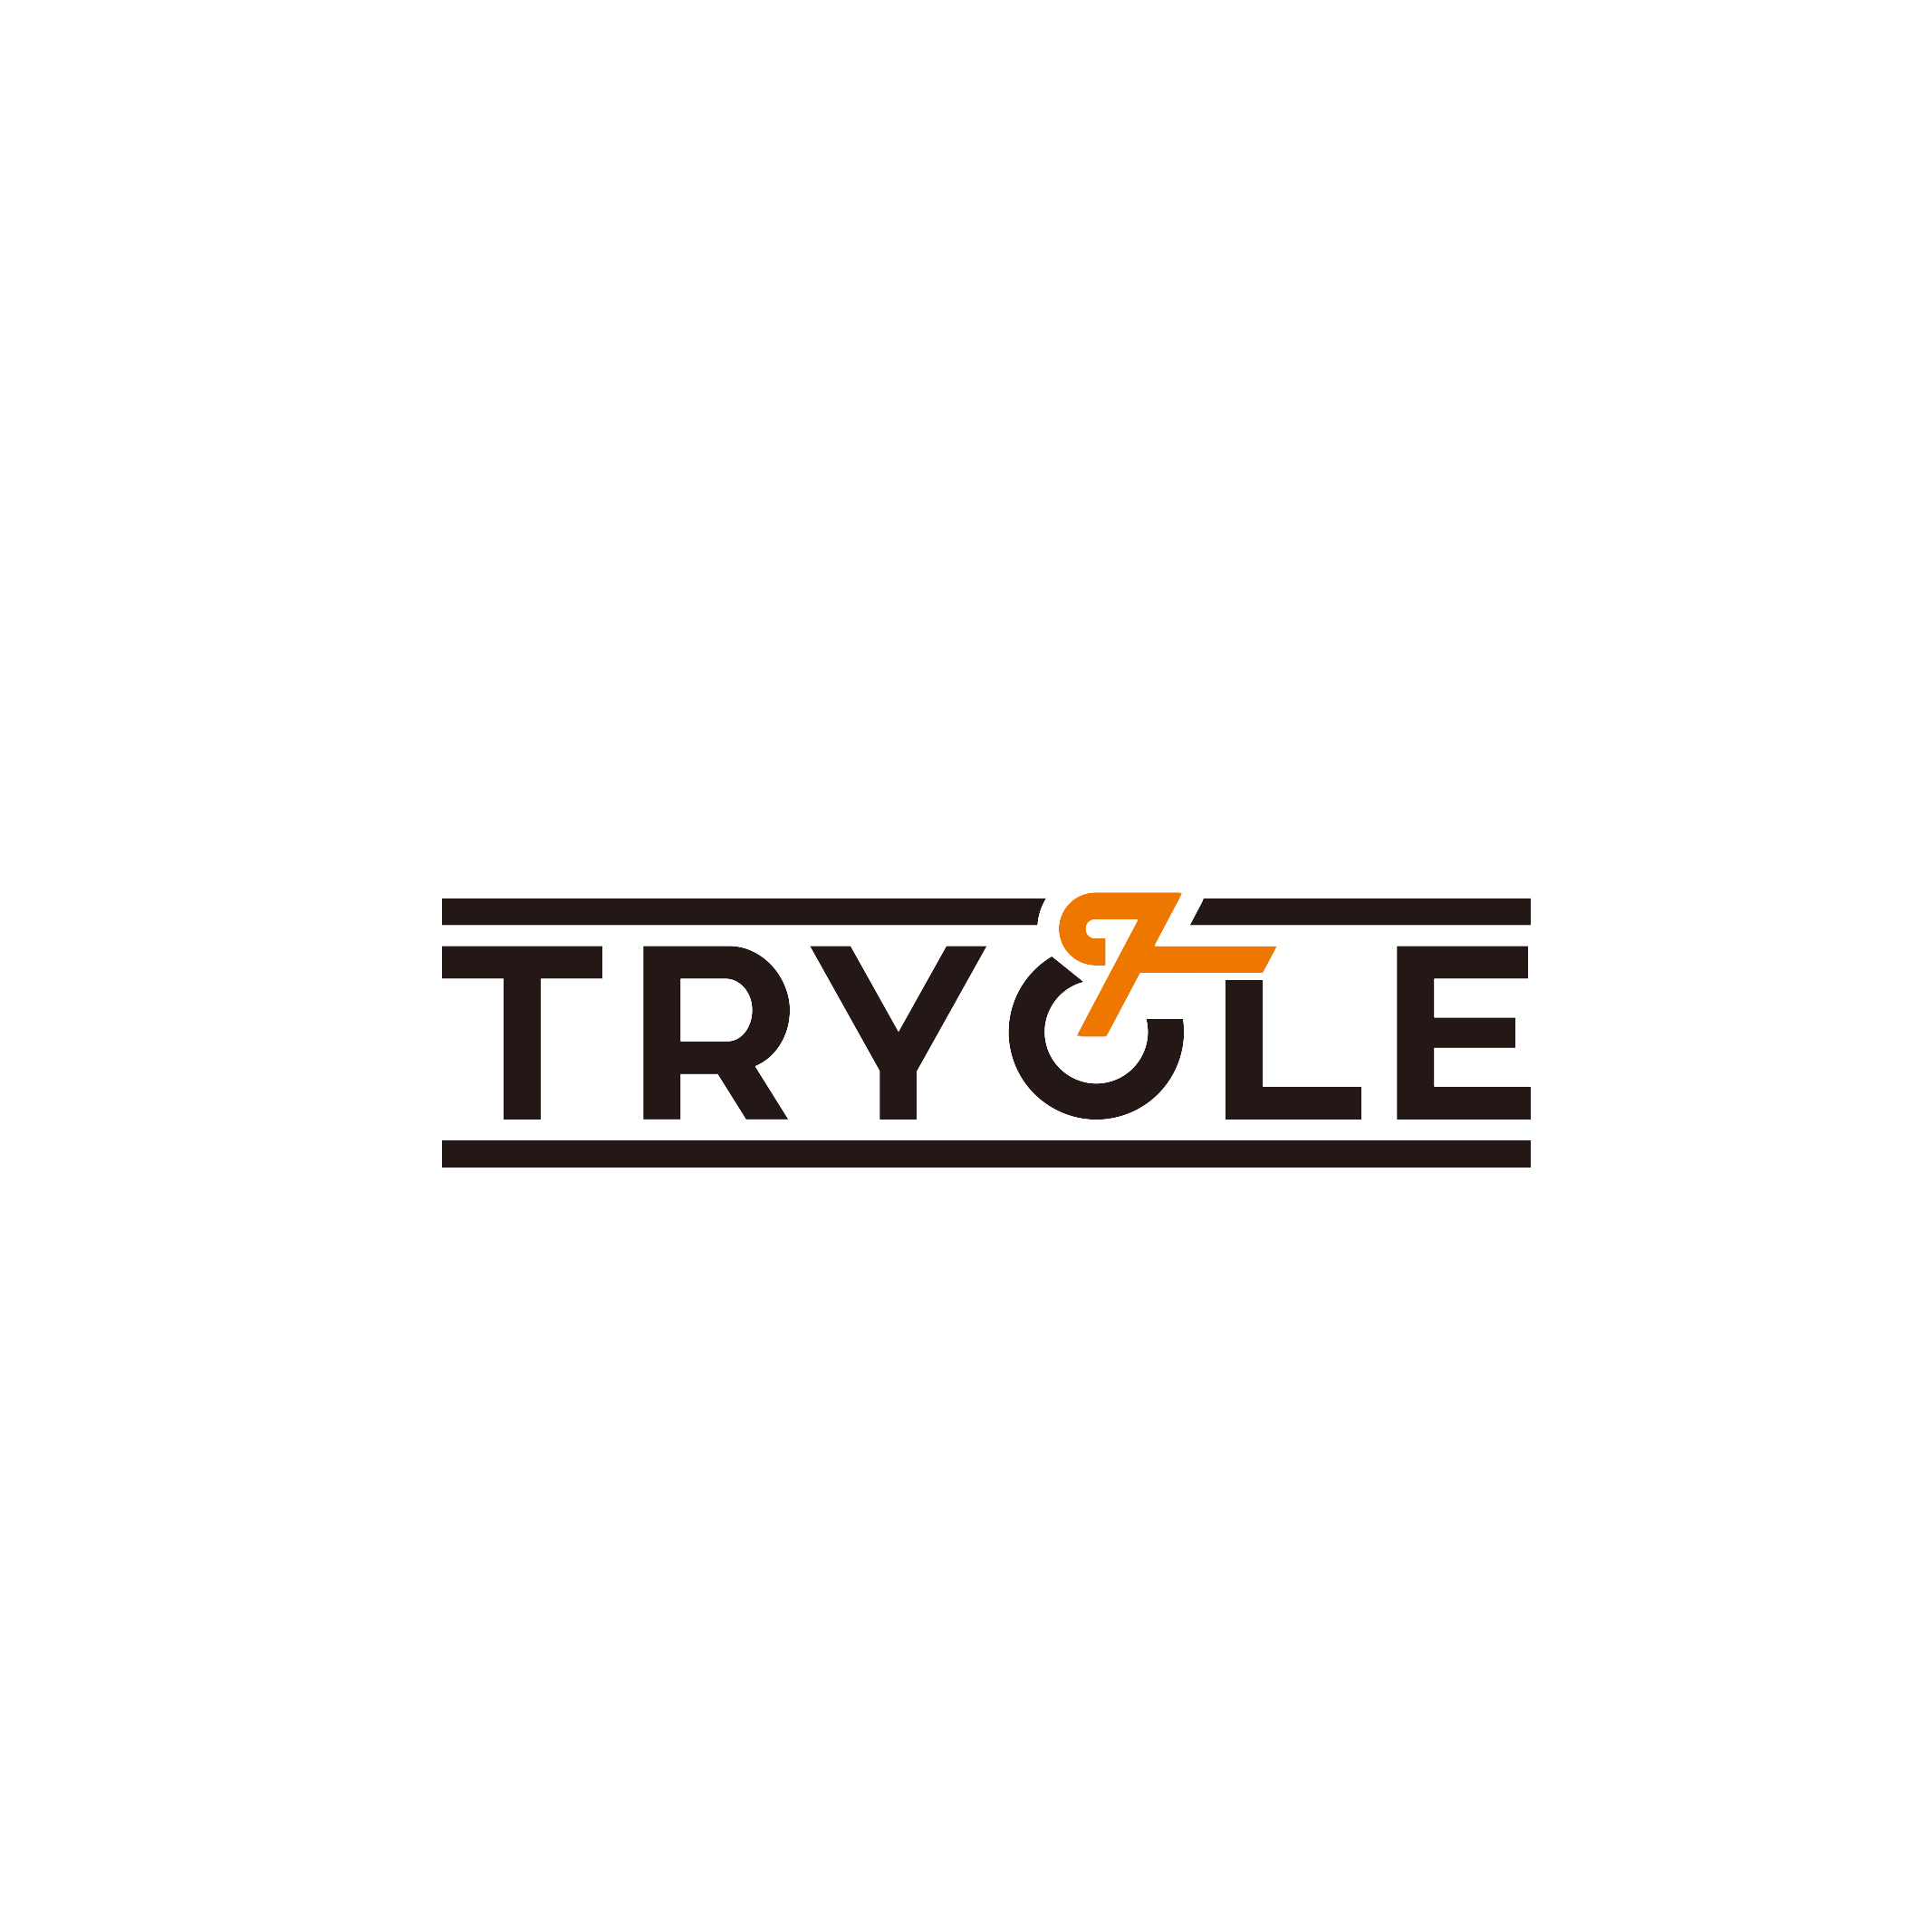 TRYCLE/BARACAN